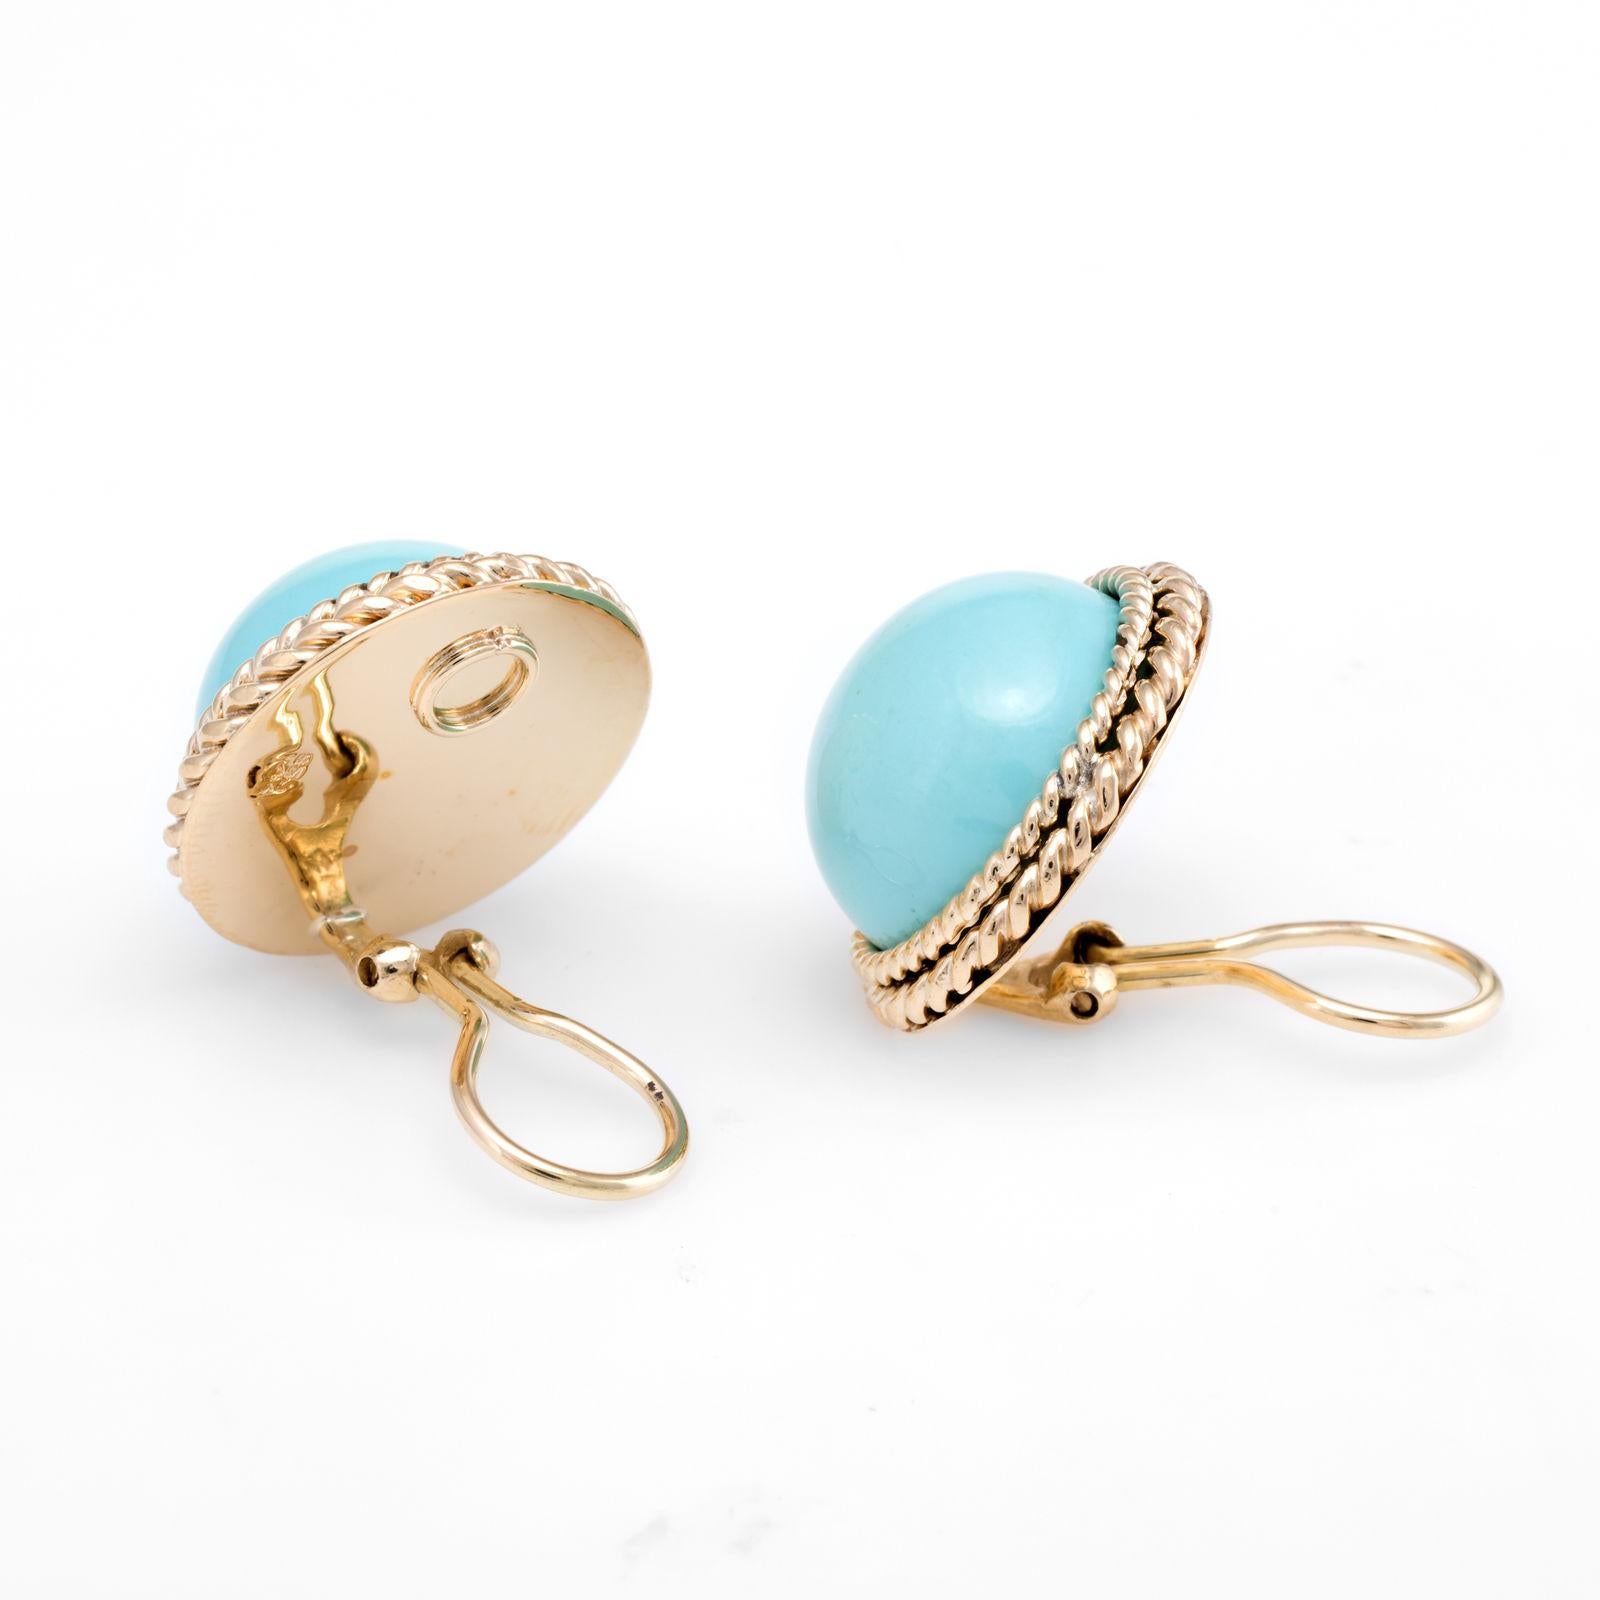 Elegant pair of vintage clip earrings (circa 1950s to 1960s), crafted in 14k yellow gold. 

Cabochon cut egg shell blue turquoise measures 16.25mm (each) and totals an estimated weight of 40 carats (20 carats each). The turquoise is in excellent